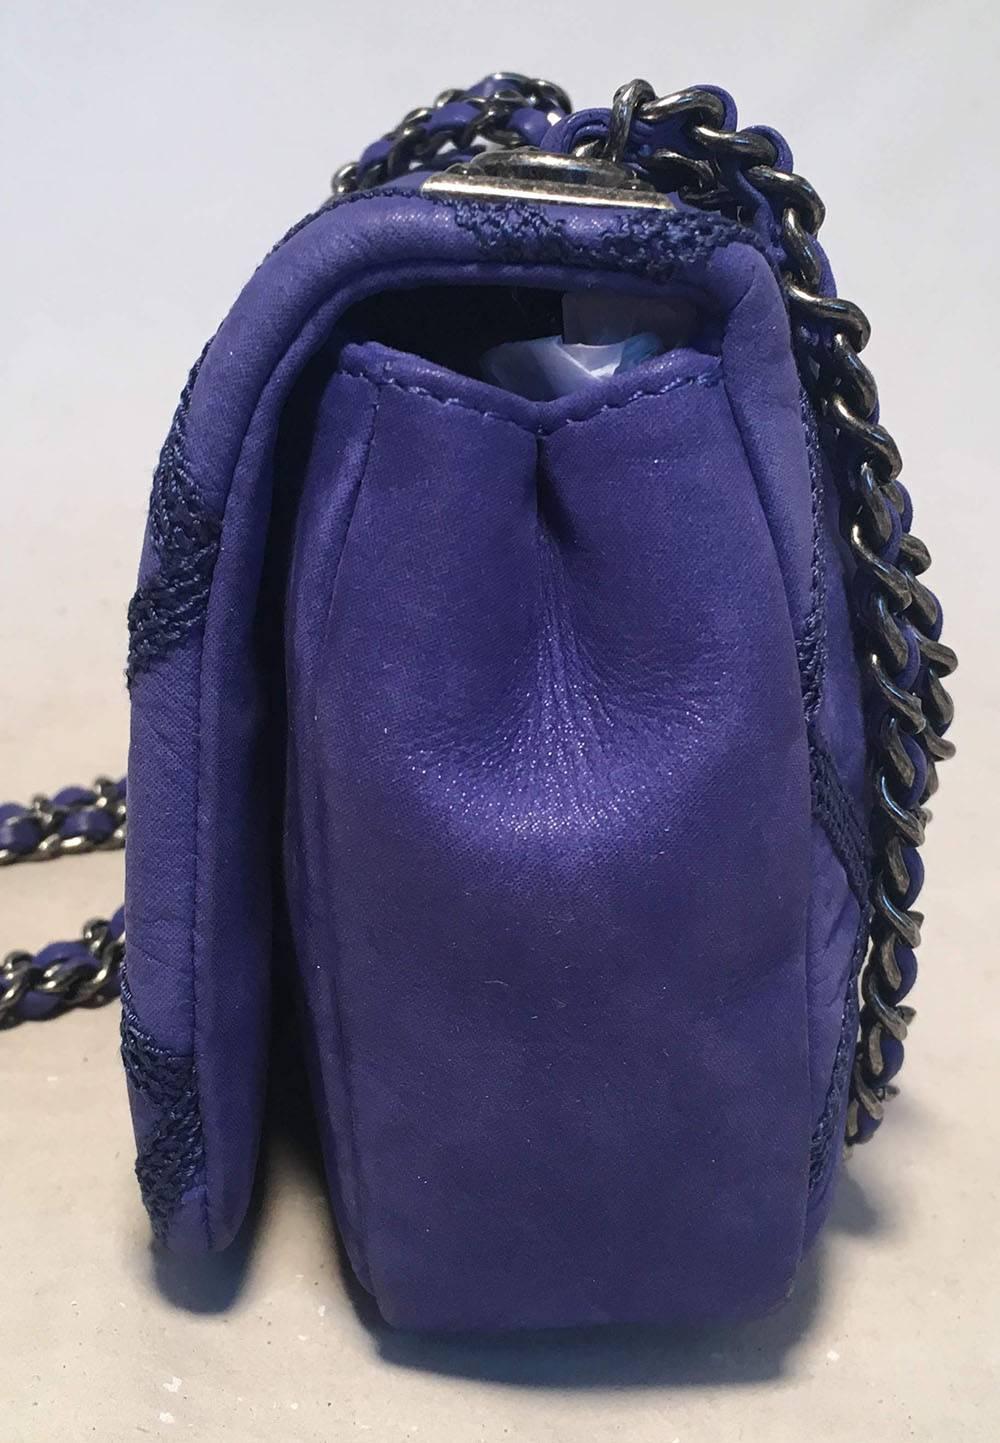 FABULOUS Chanel blue leather topstitch quilted small classic flap in excellent condition.  Electric royal blue leather exterior trimmed with darker blue triple threaded diamond quilted stitching and antiqued silver hardware. Woven chain and leather